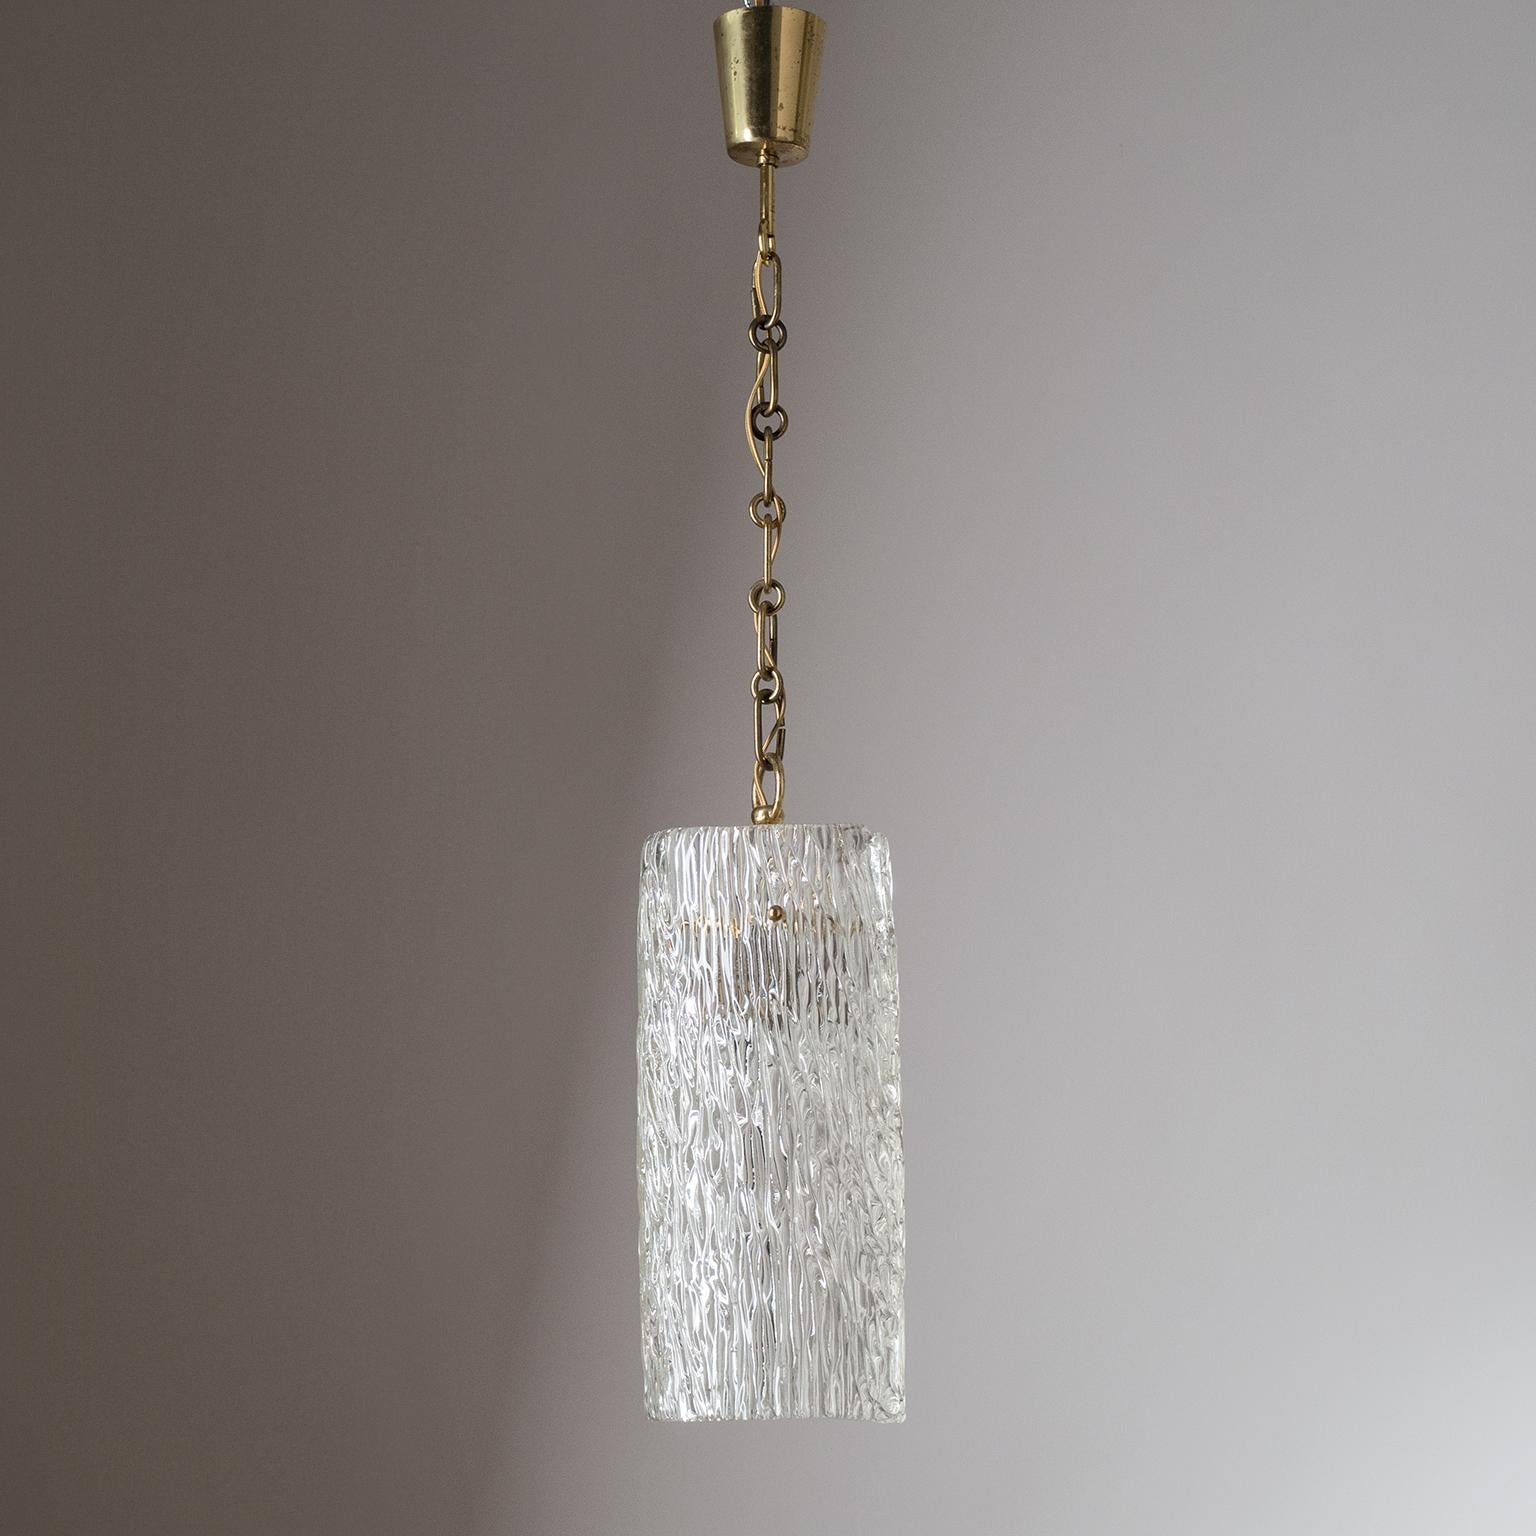 Large textured glass and brass pendant by J.T. Kalmar, circa 1950. Made from a single sheet of textured glass which is 'curled' into a large, slightly organic, cylinder. One original brass E27 socket with new wiring. Height without the chain is